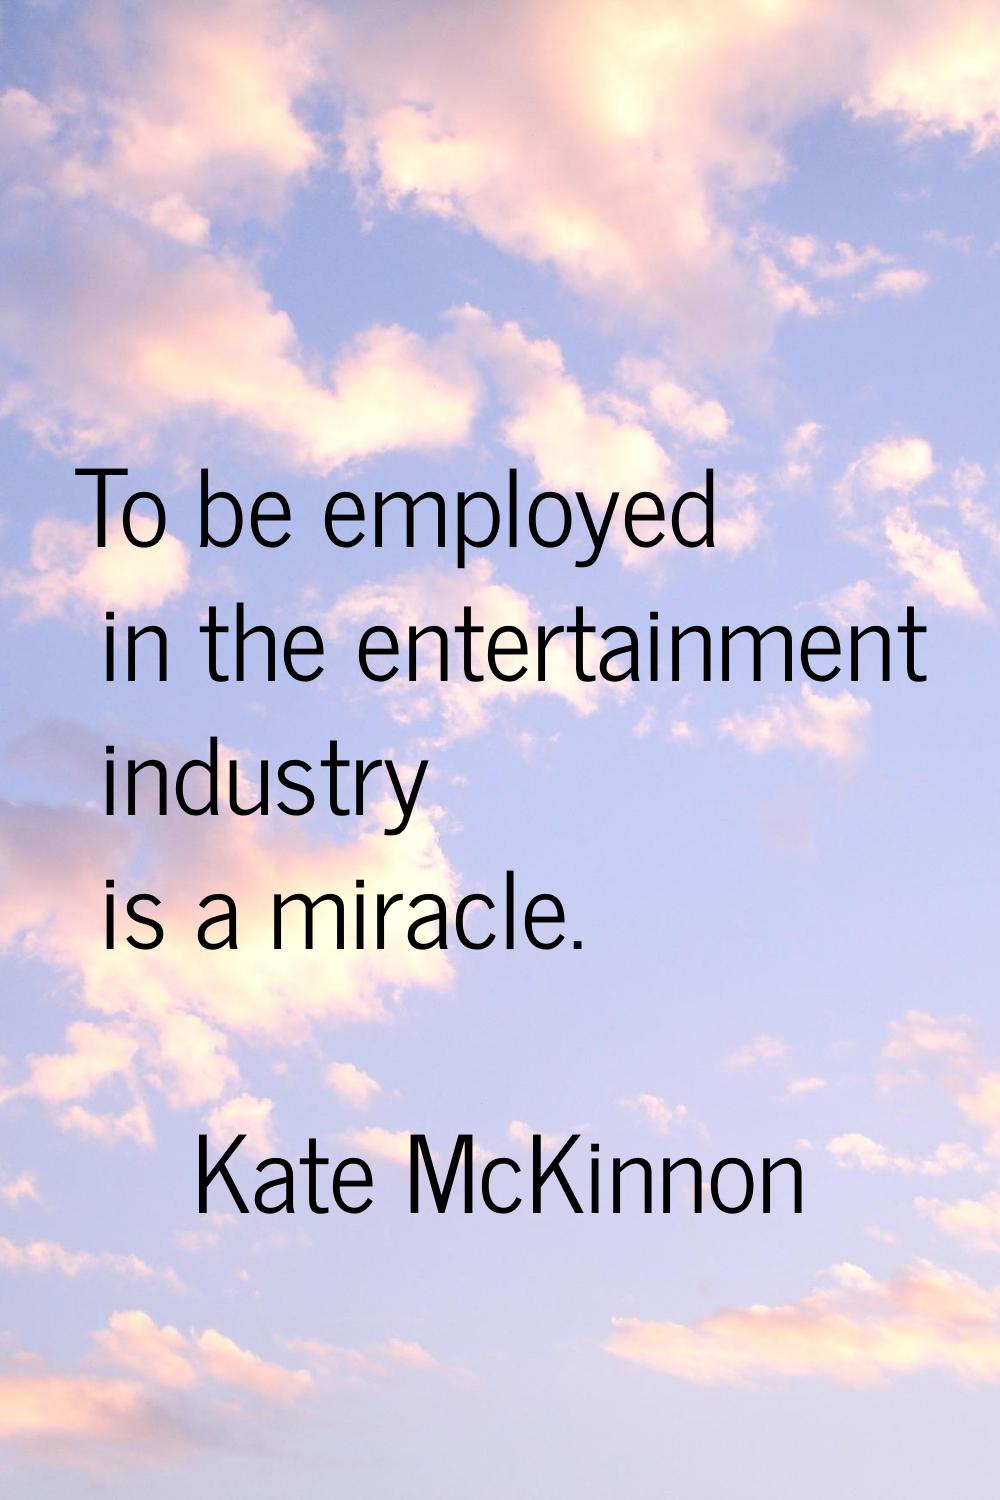 To be employed in the entertainment industry is a miracle.